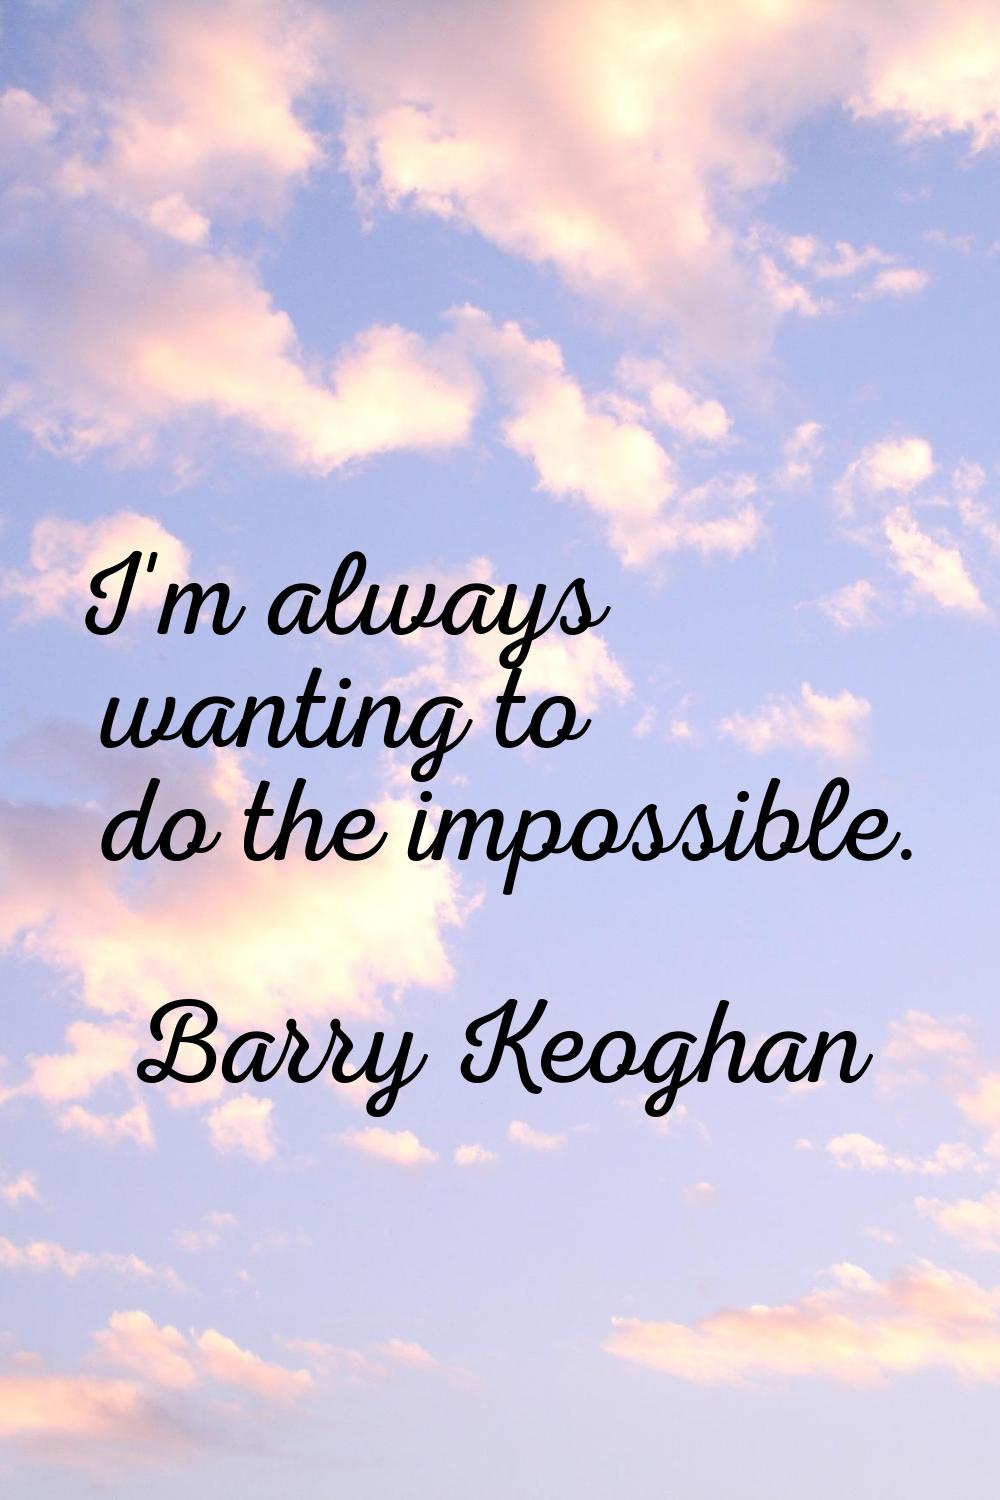 I'm always wanting to do the impossible.